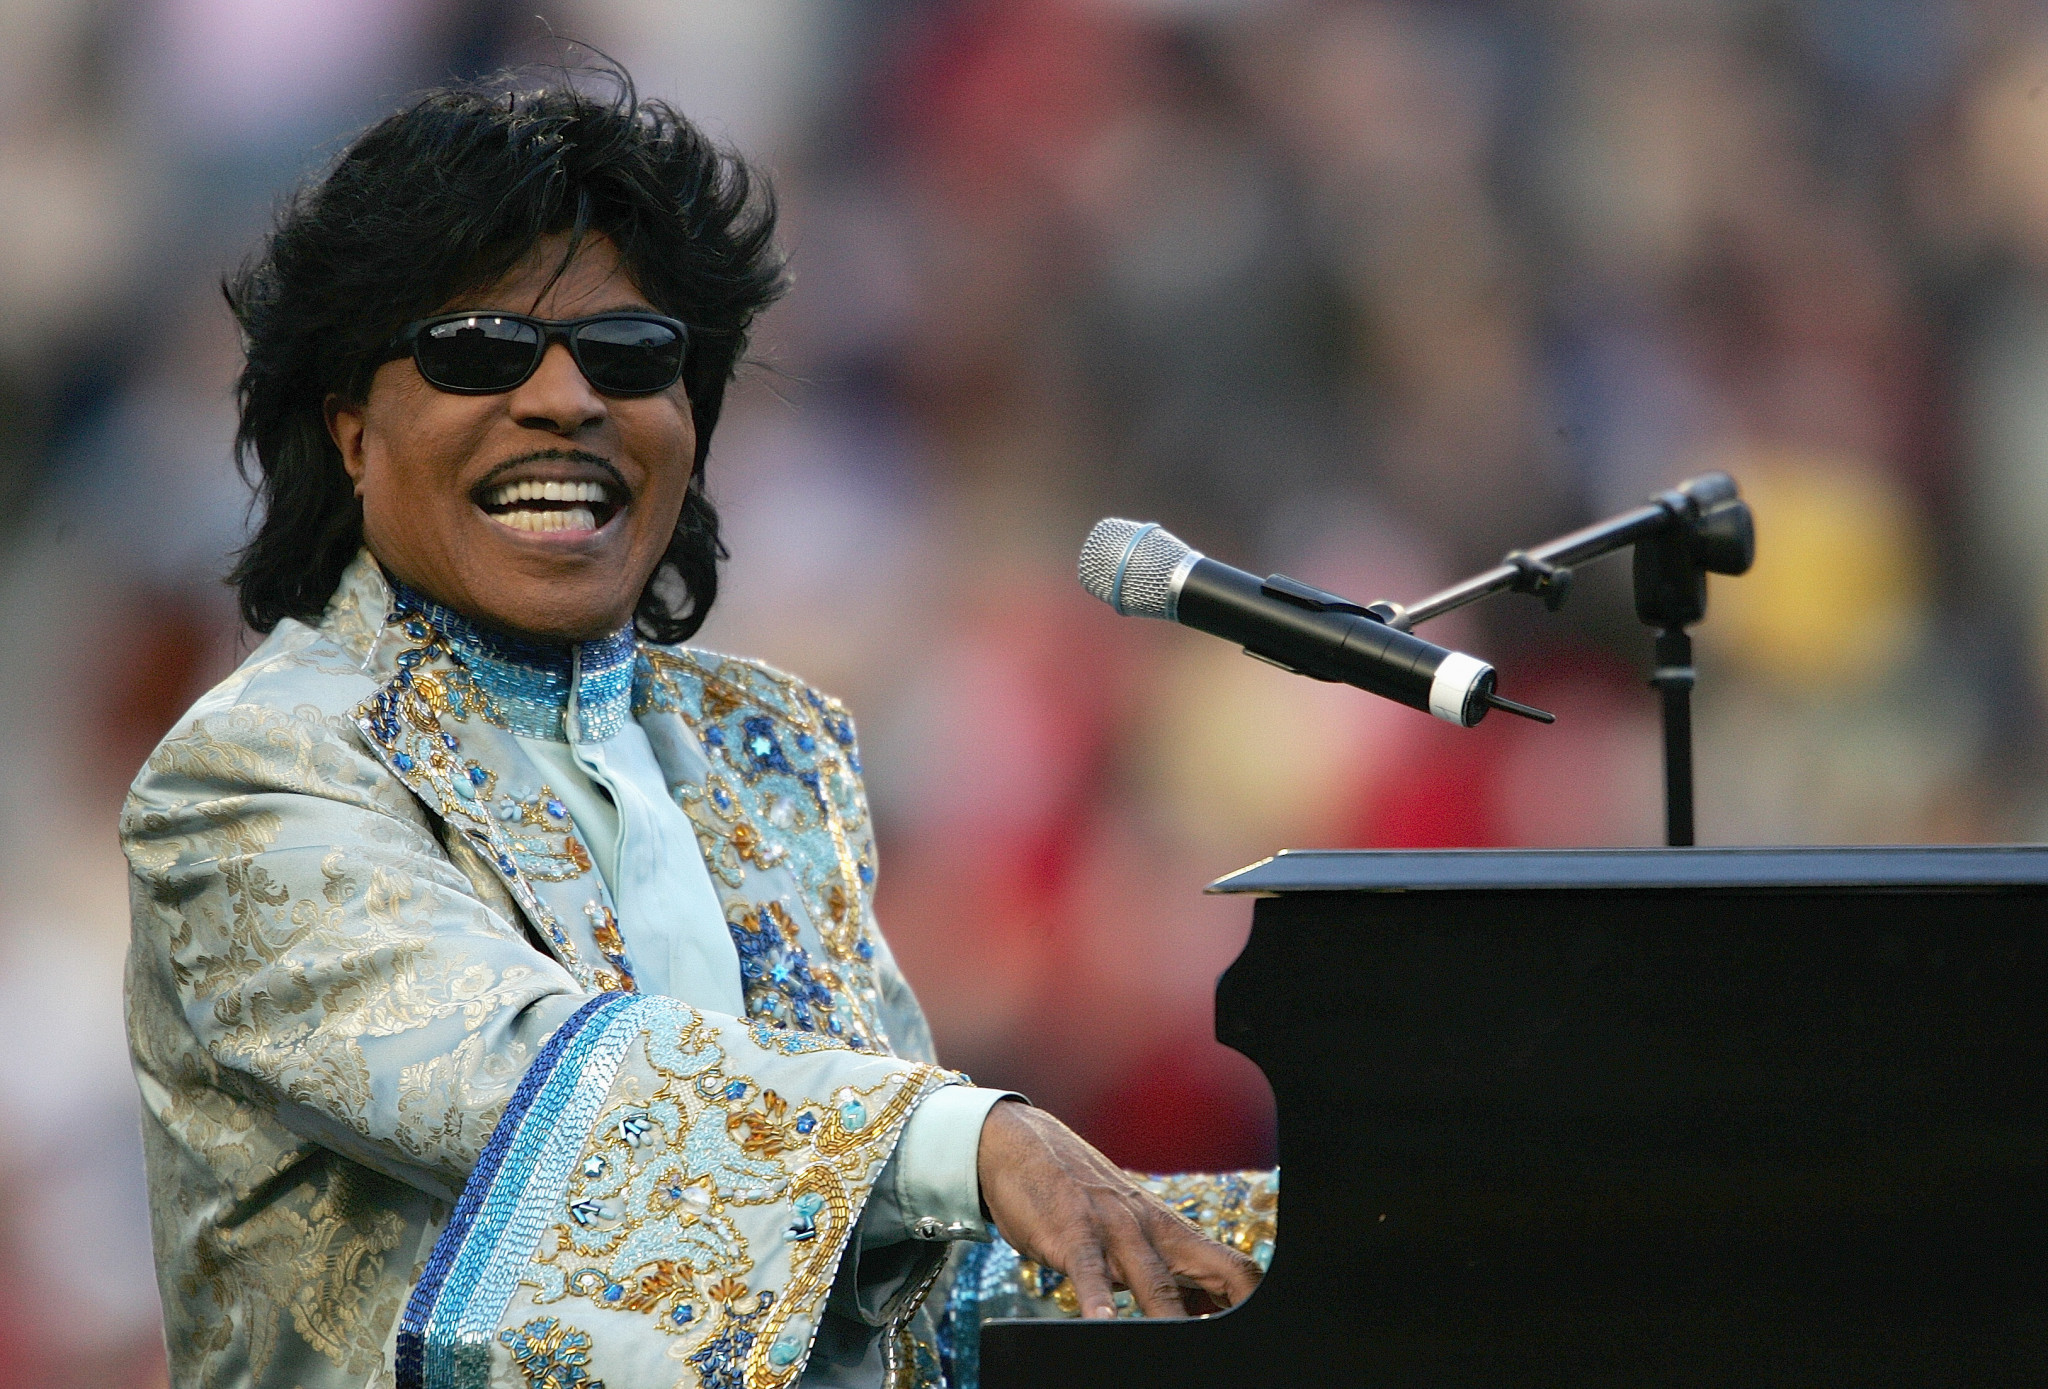 Tributes paid to musician Little Richard who performed at Closing Ceremony of Atlanta 1996 Olympics